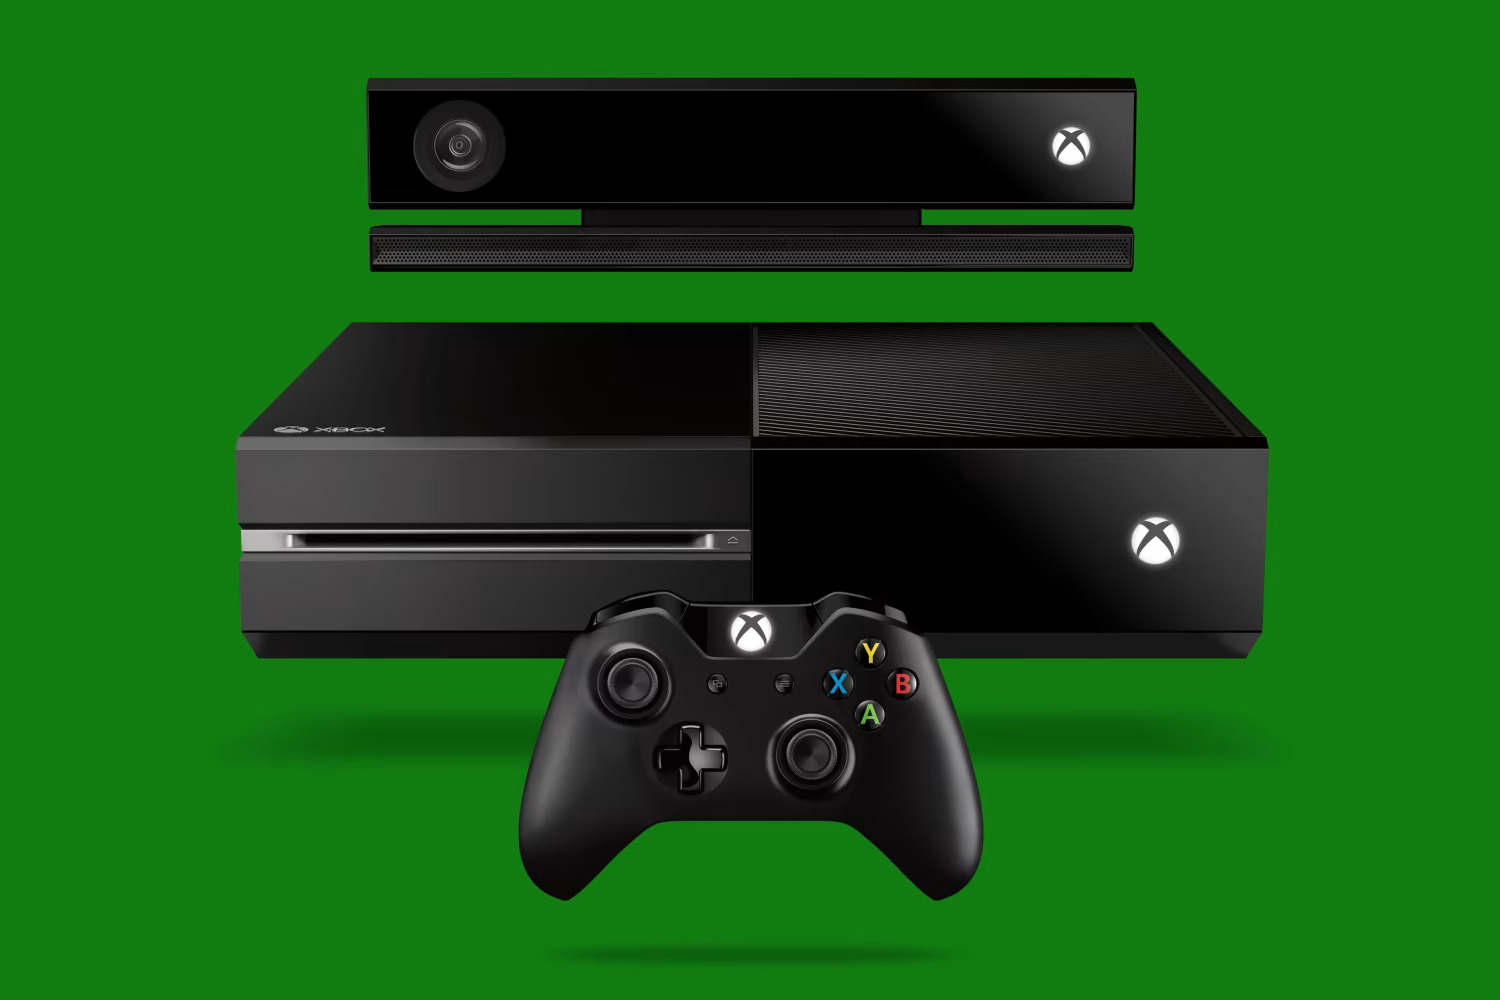 Xbox One: Controller And Kinect